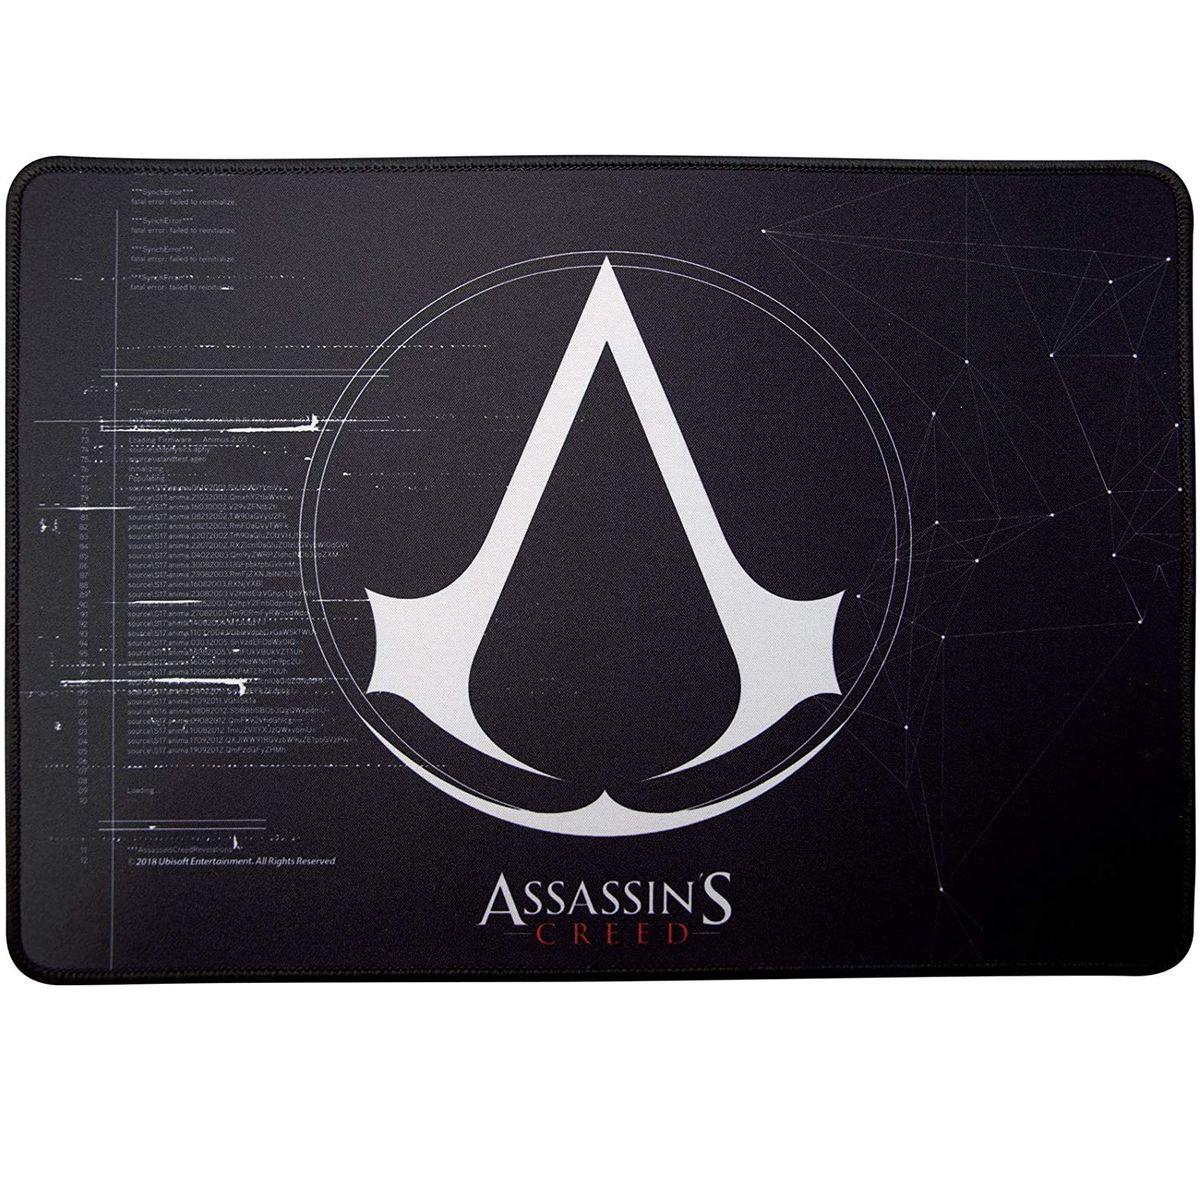 ABYSTYLE Assassin\'s Creed Gaming Mauspad mm mm) 0 (0 Mauspad x